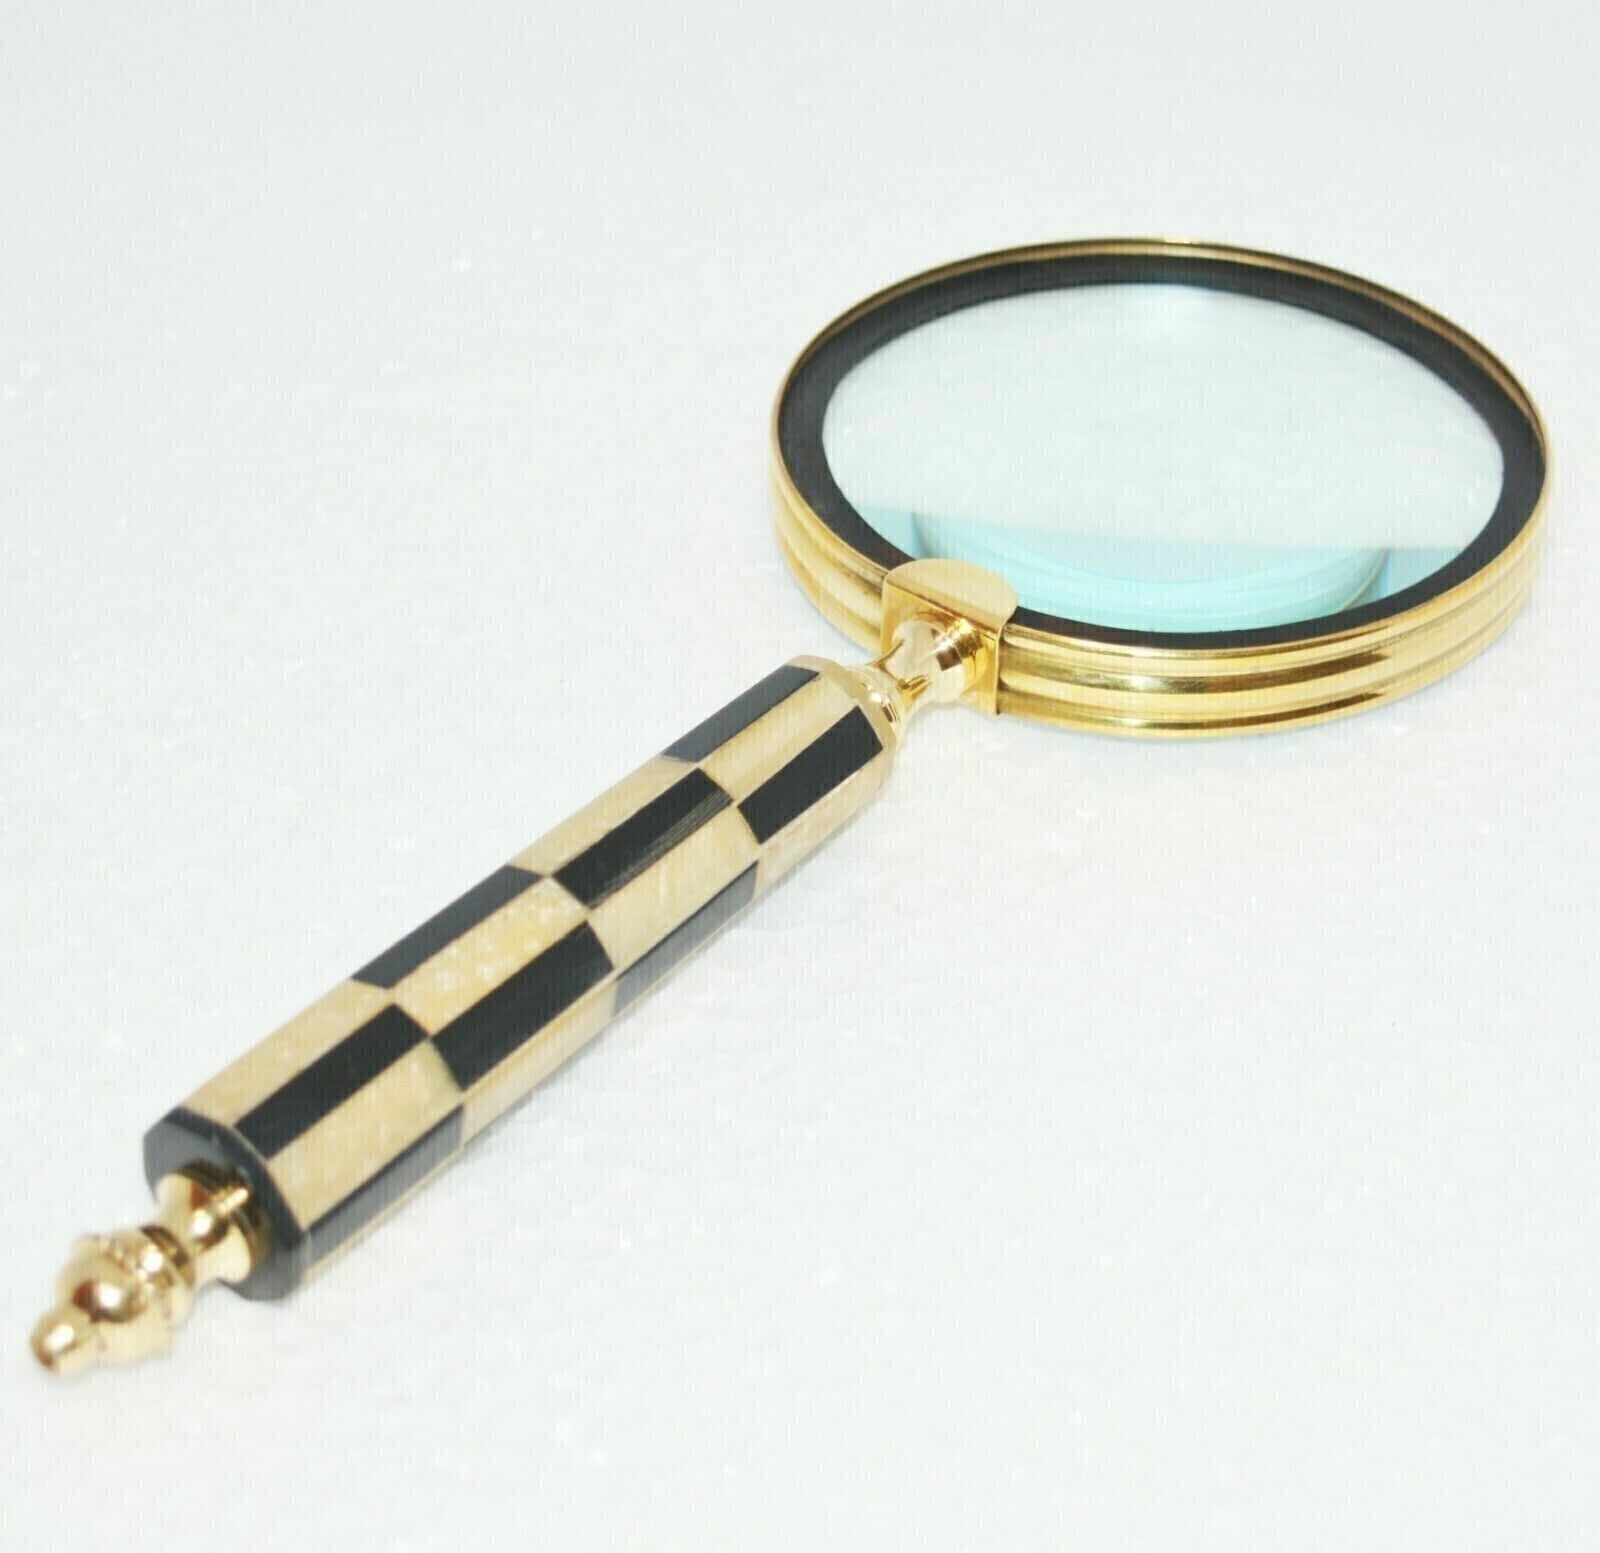 An antique, vintage brass maritime magnifying glass with a sturdy resin handle